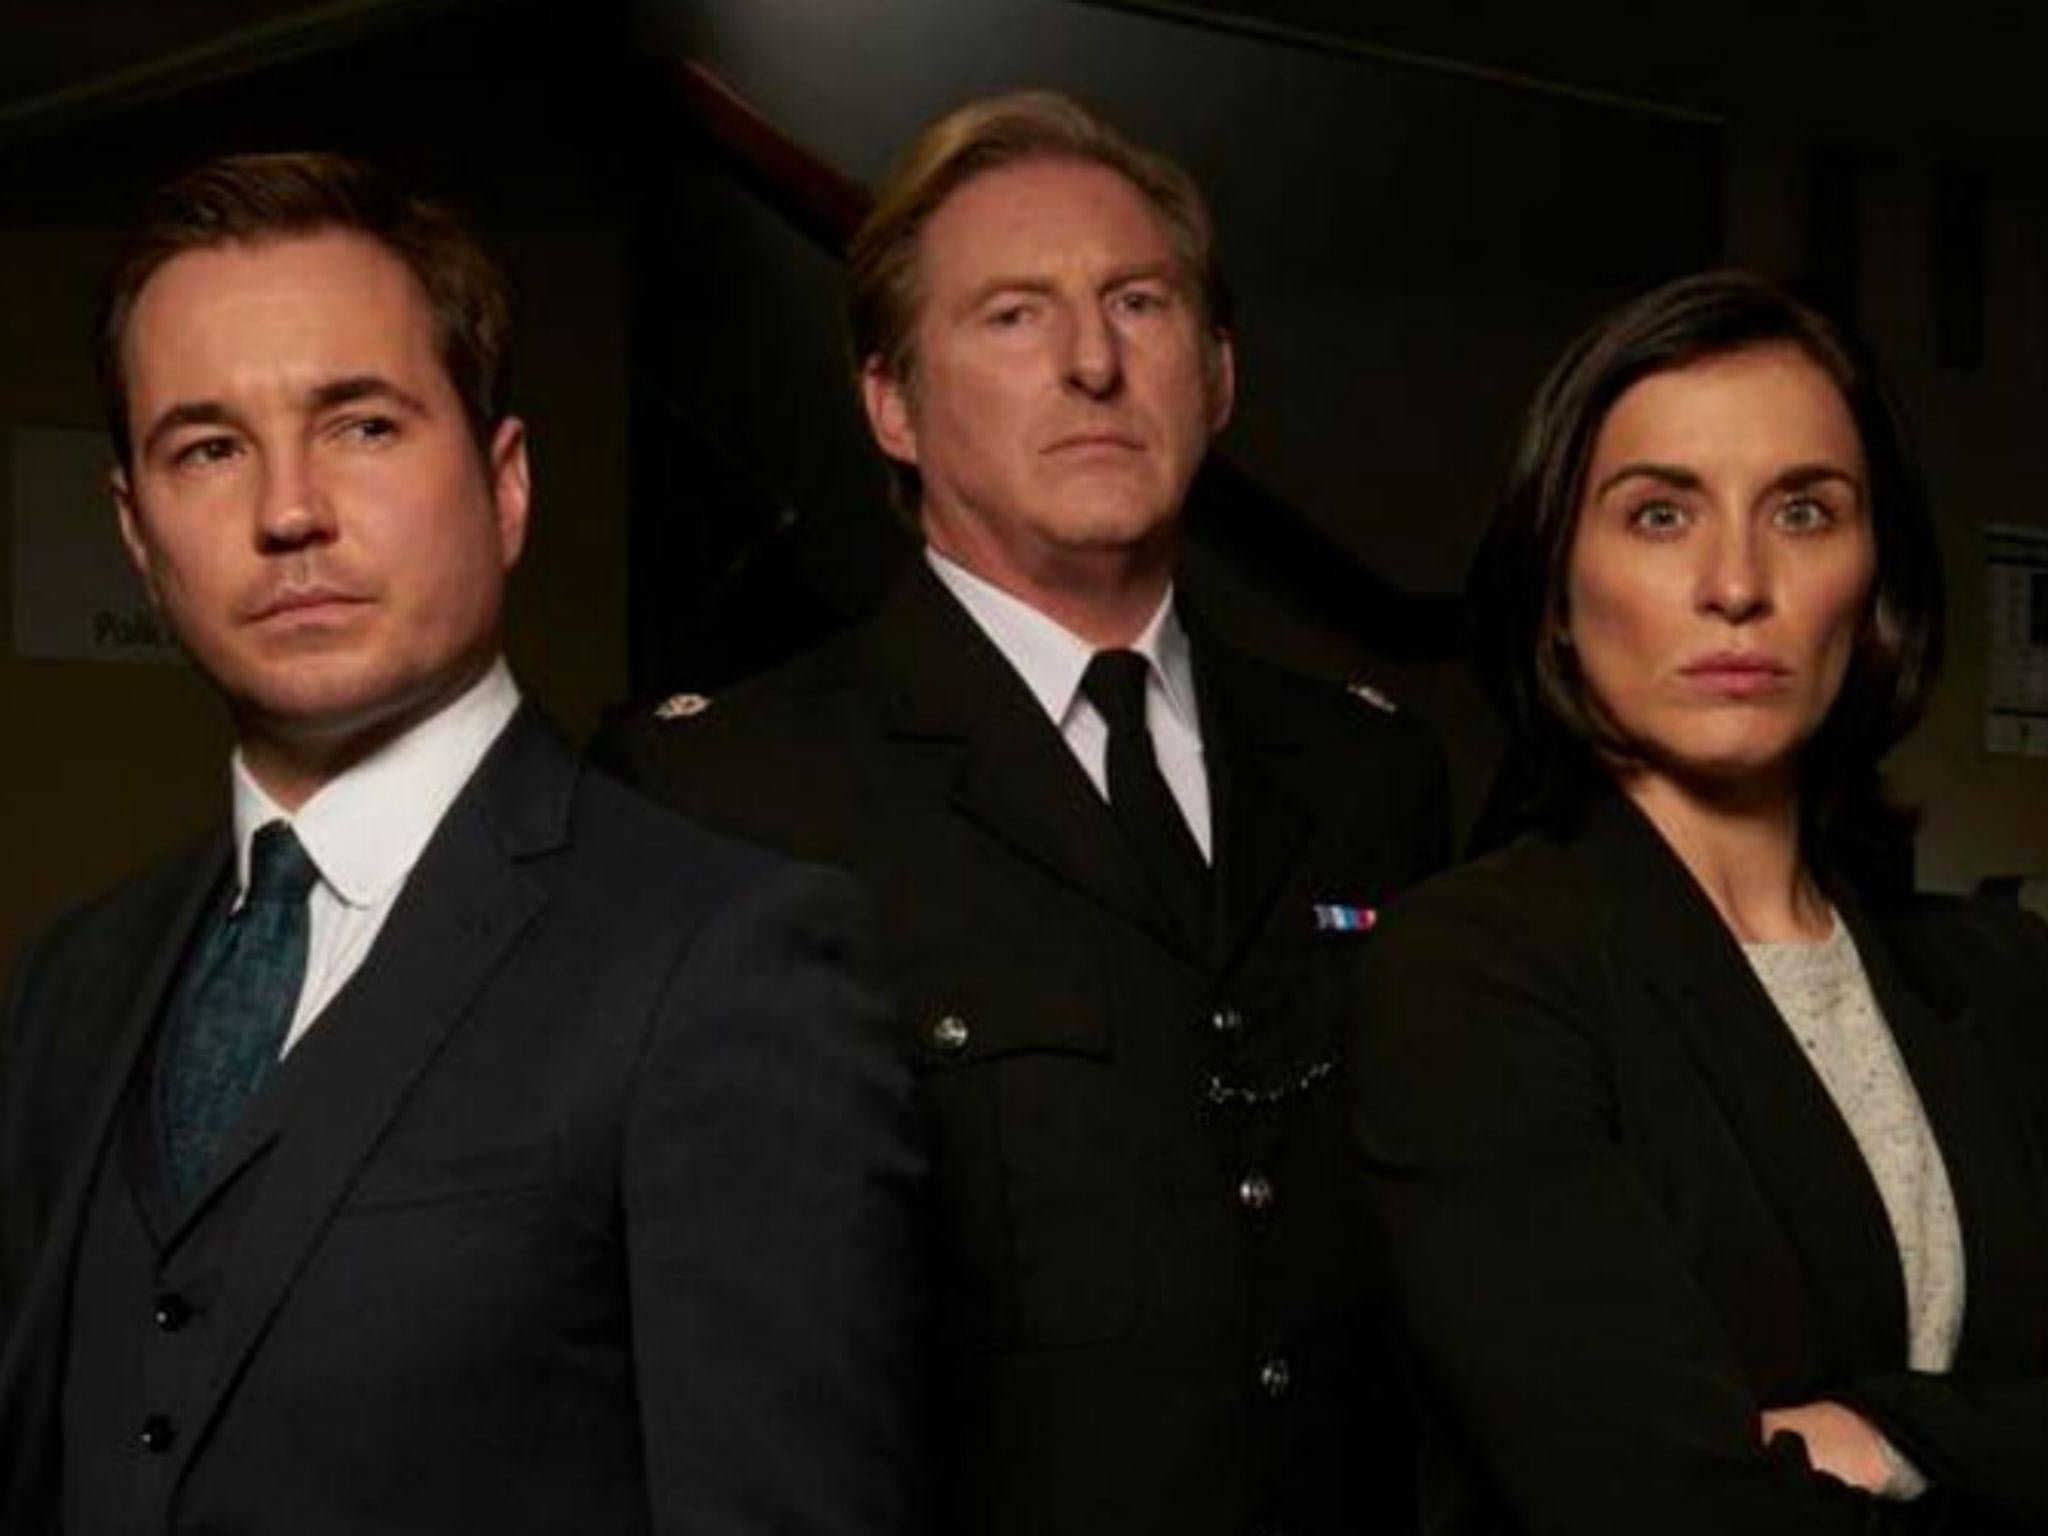 The 20 Greatest Tv Cop Shows Of All Time From Line Of Duty To The